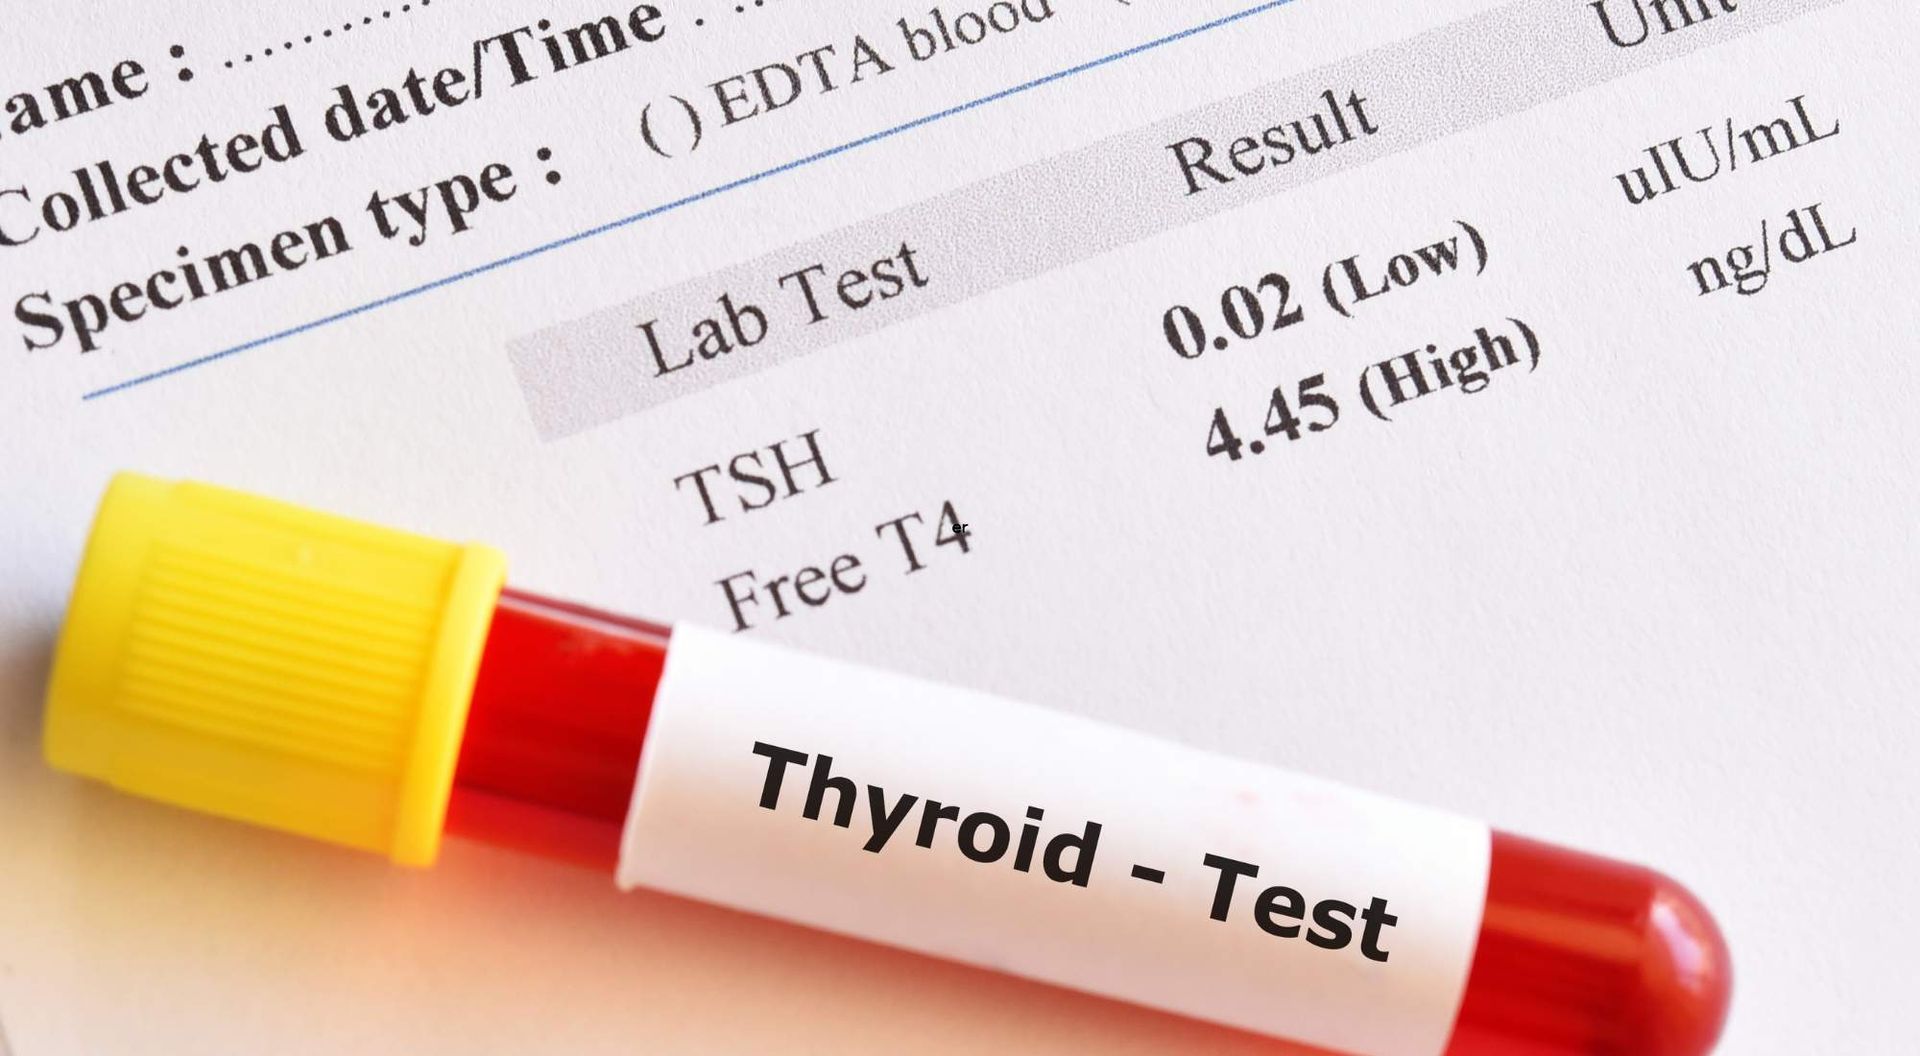 can you have hypothyroidsim with a normal tsh level